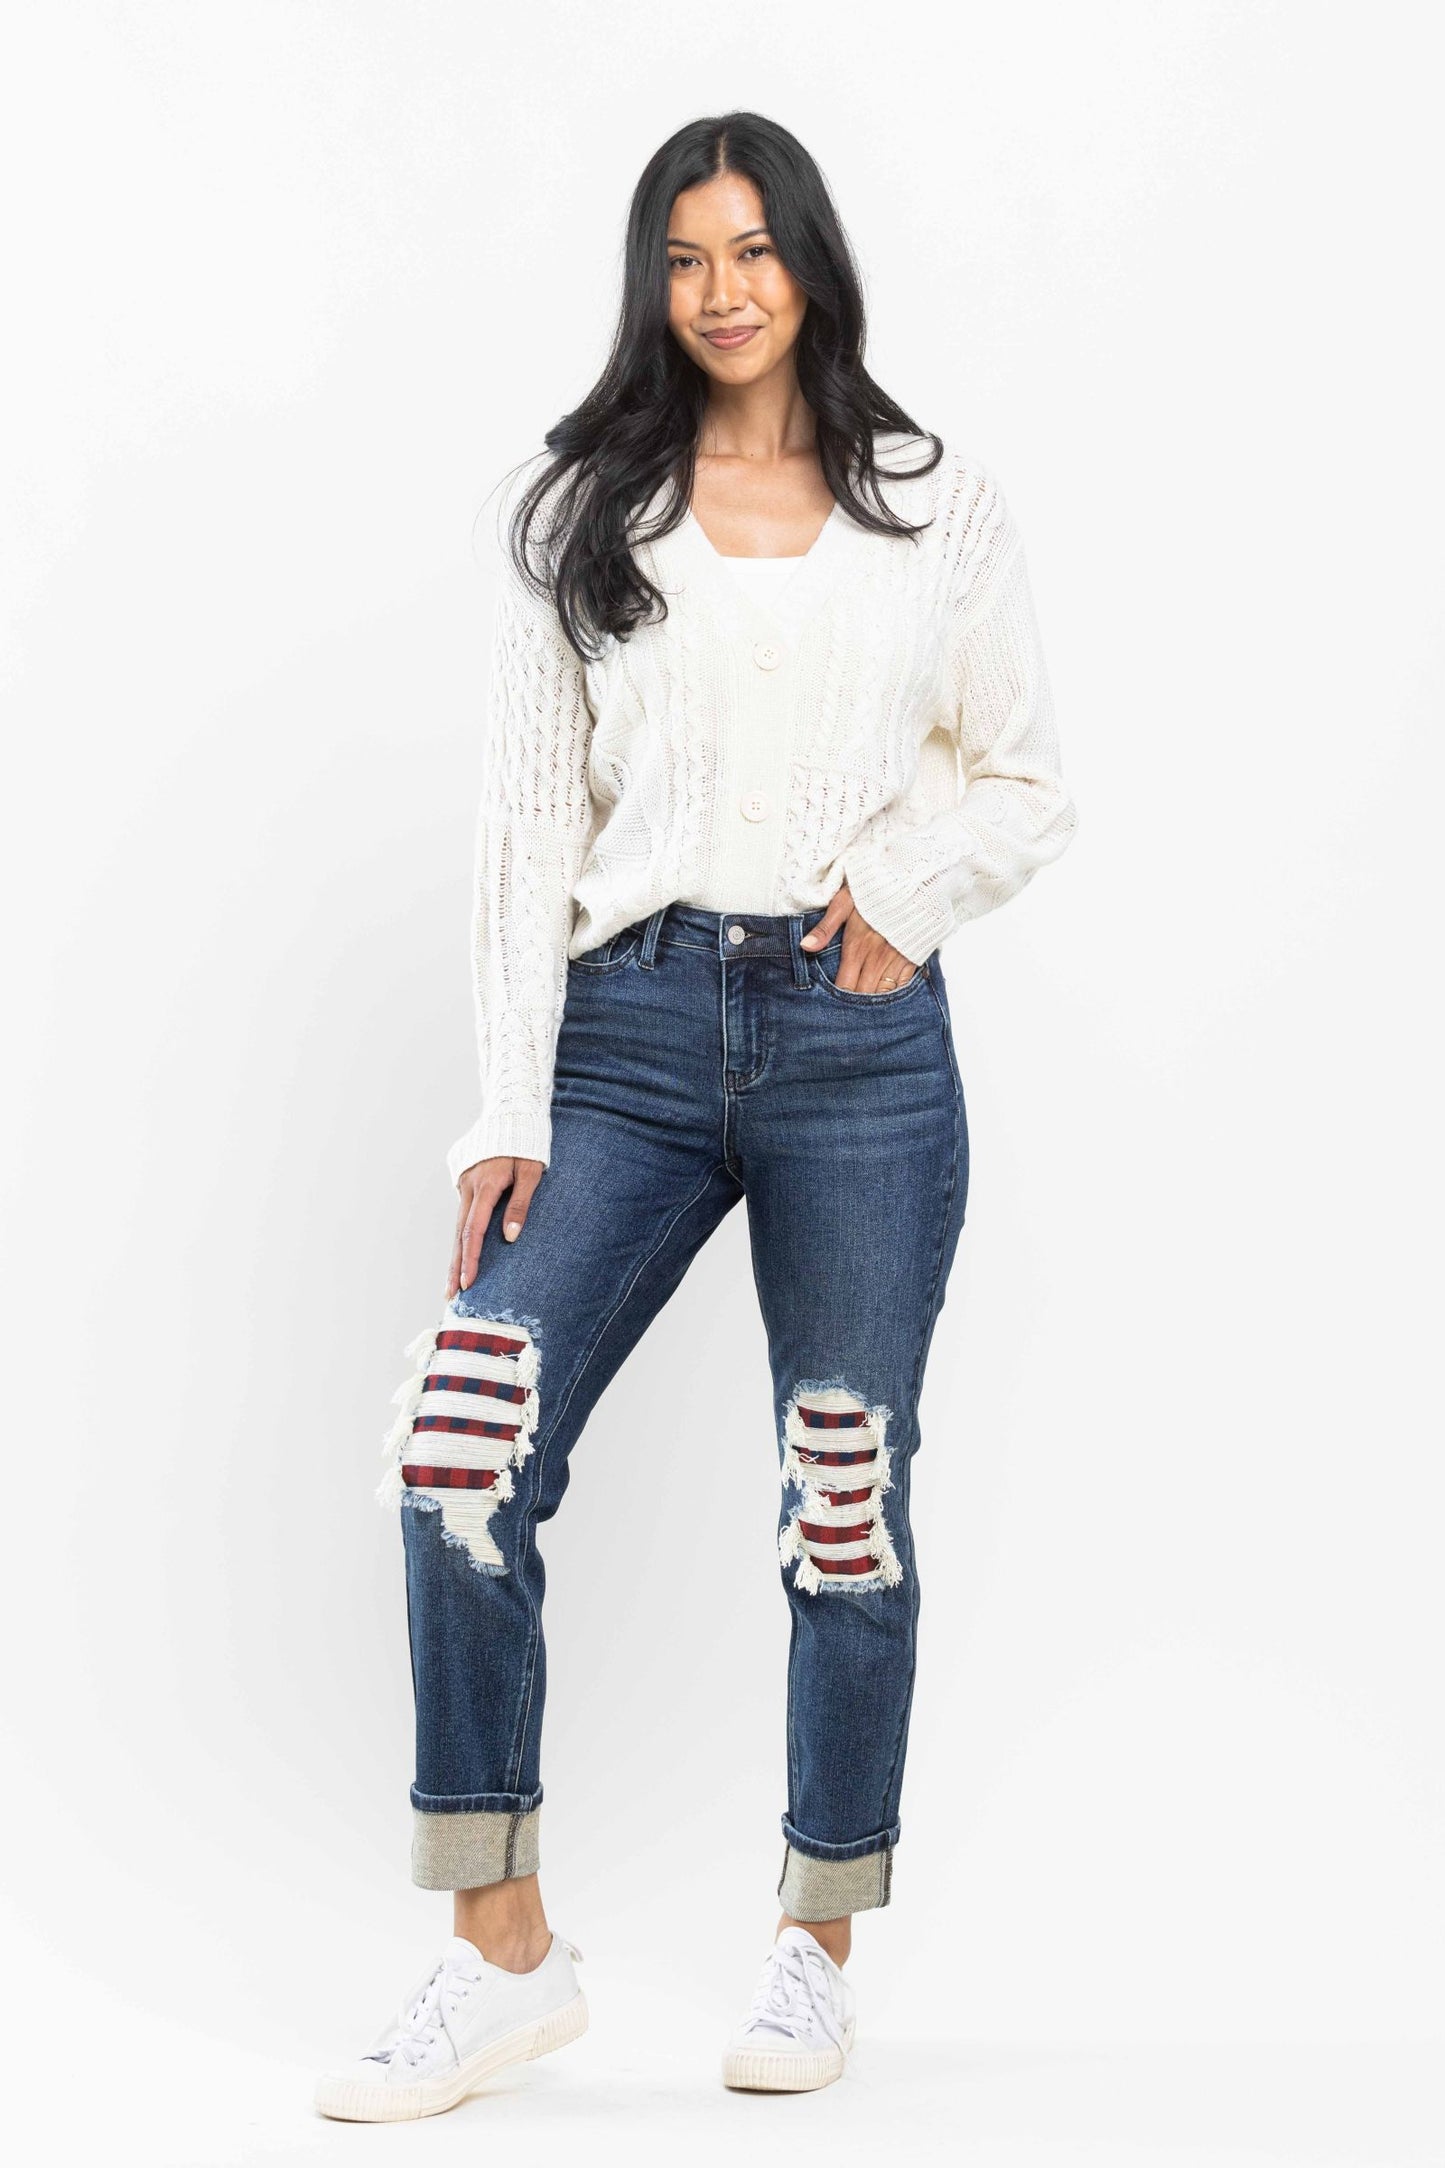 Arriving 10/3 - PreOrder - Judy Blue MidRise Buffalo Plaid Patch Destroyed Boyfriend Jeans